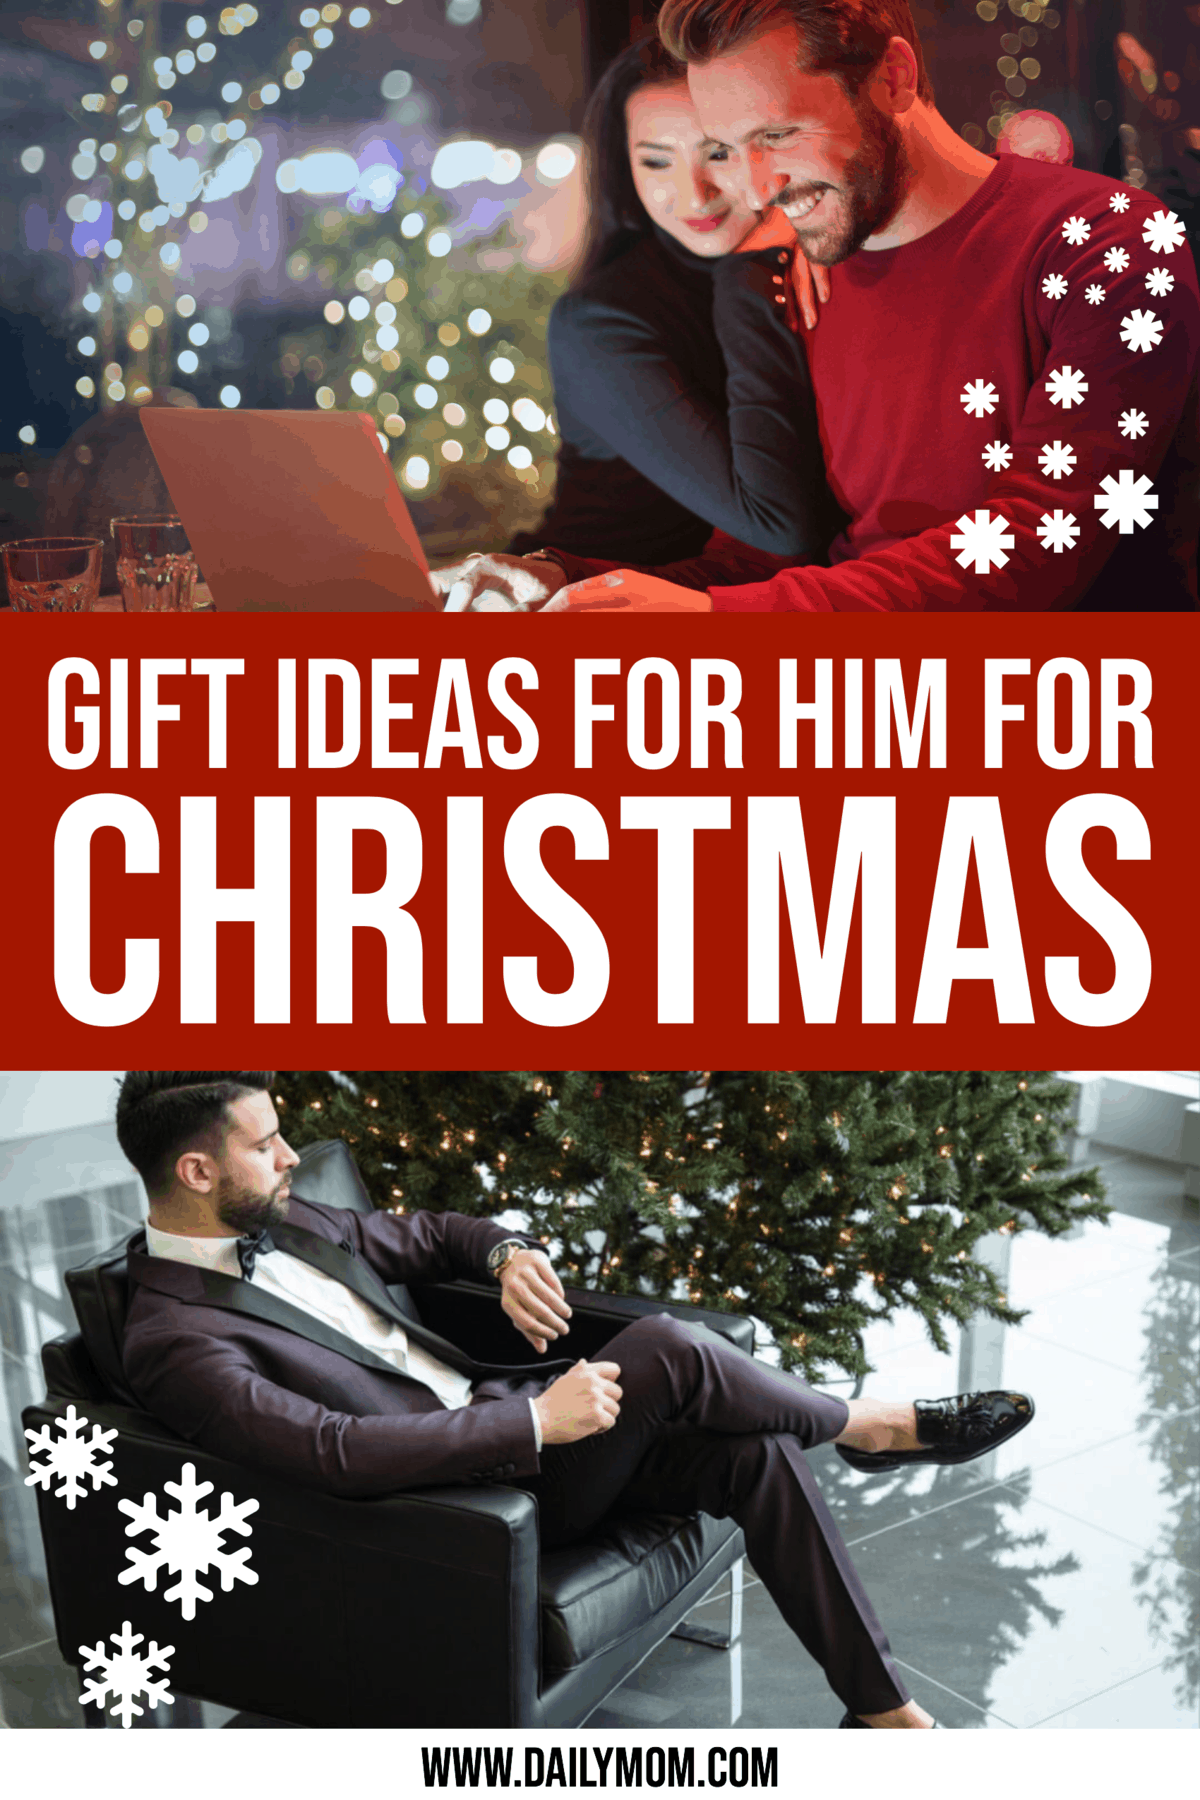 21 Gift Ideas For Him For Christmas  {2019}